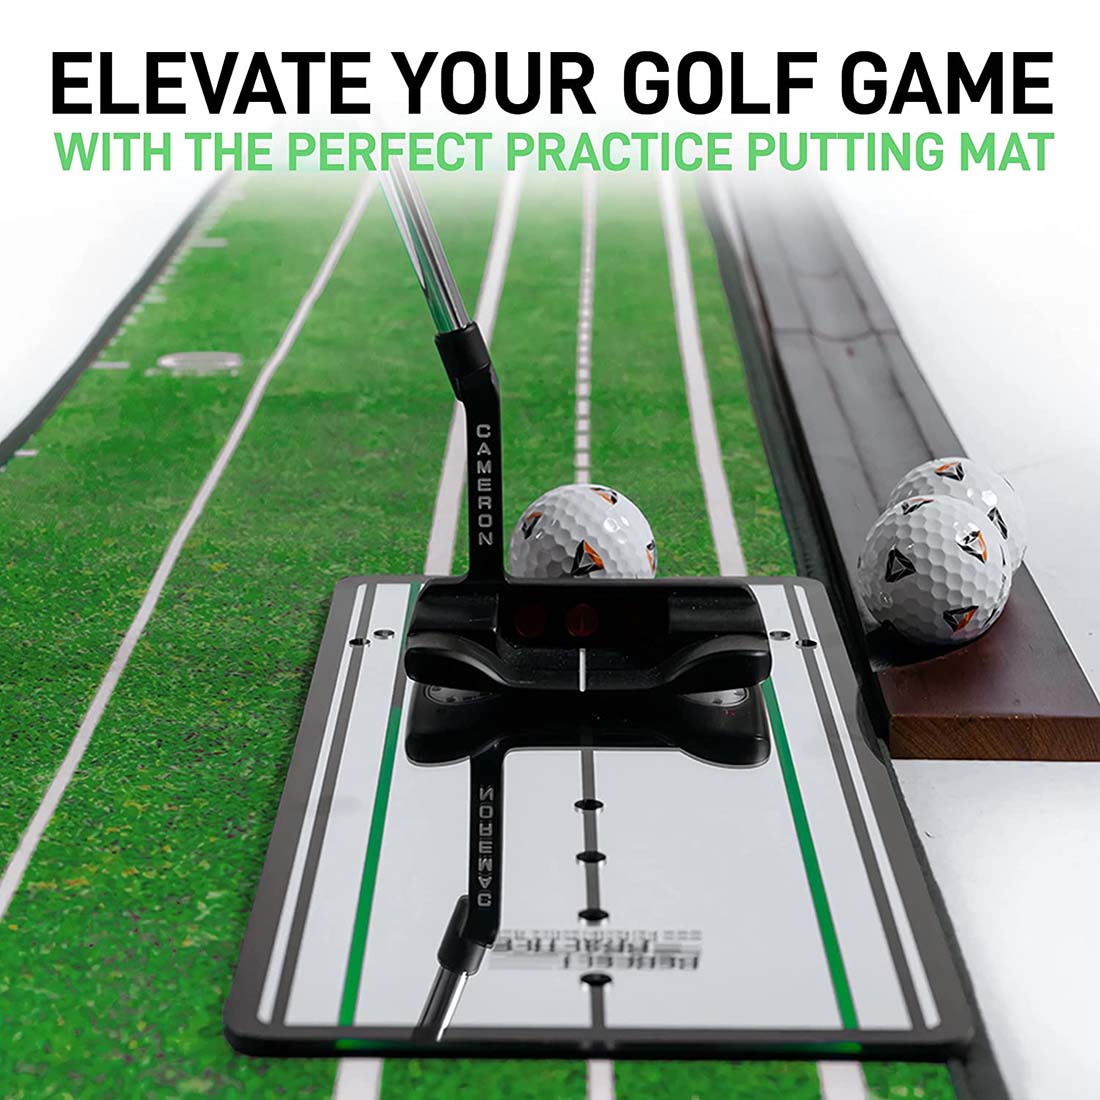 Elevate your game with the best golf accessories